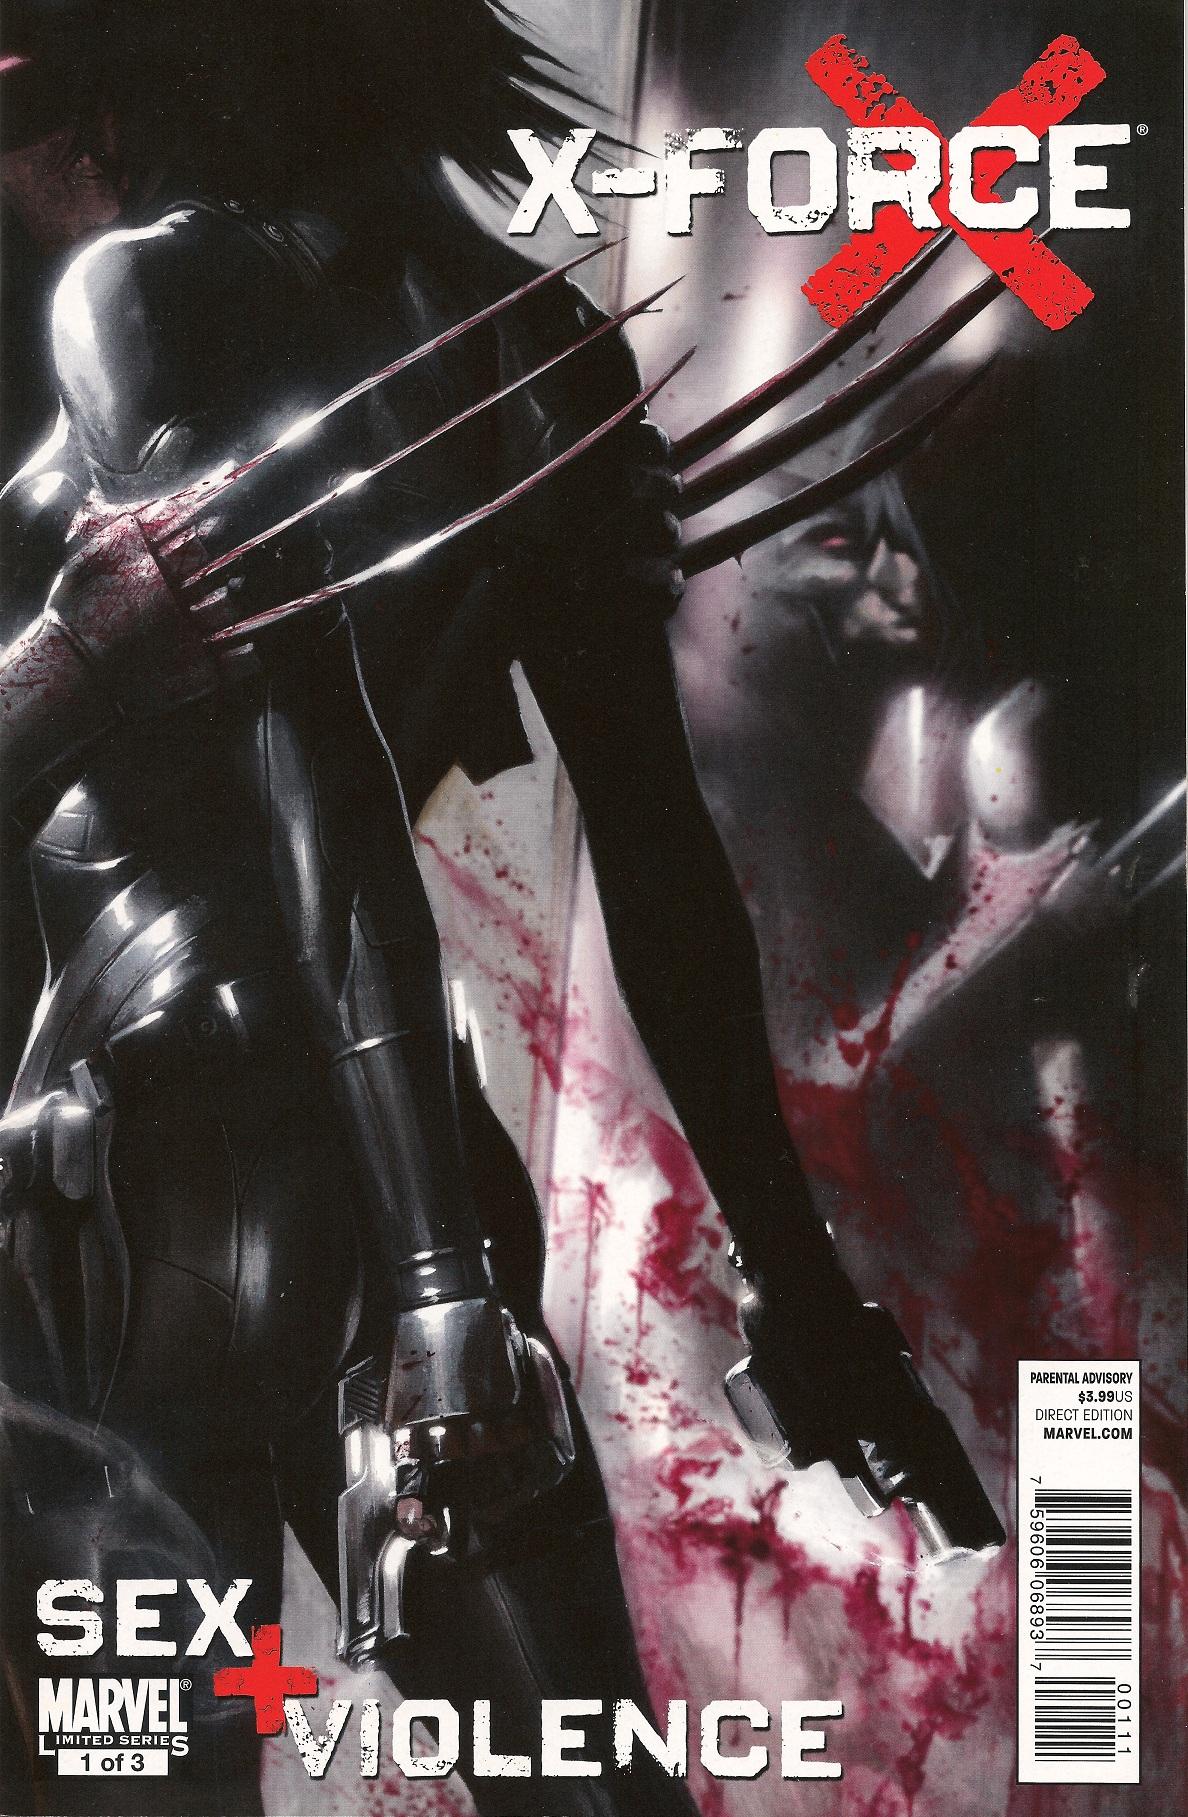 X-Force: Sex and Violence Vol. 1 #1